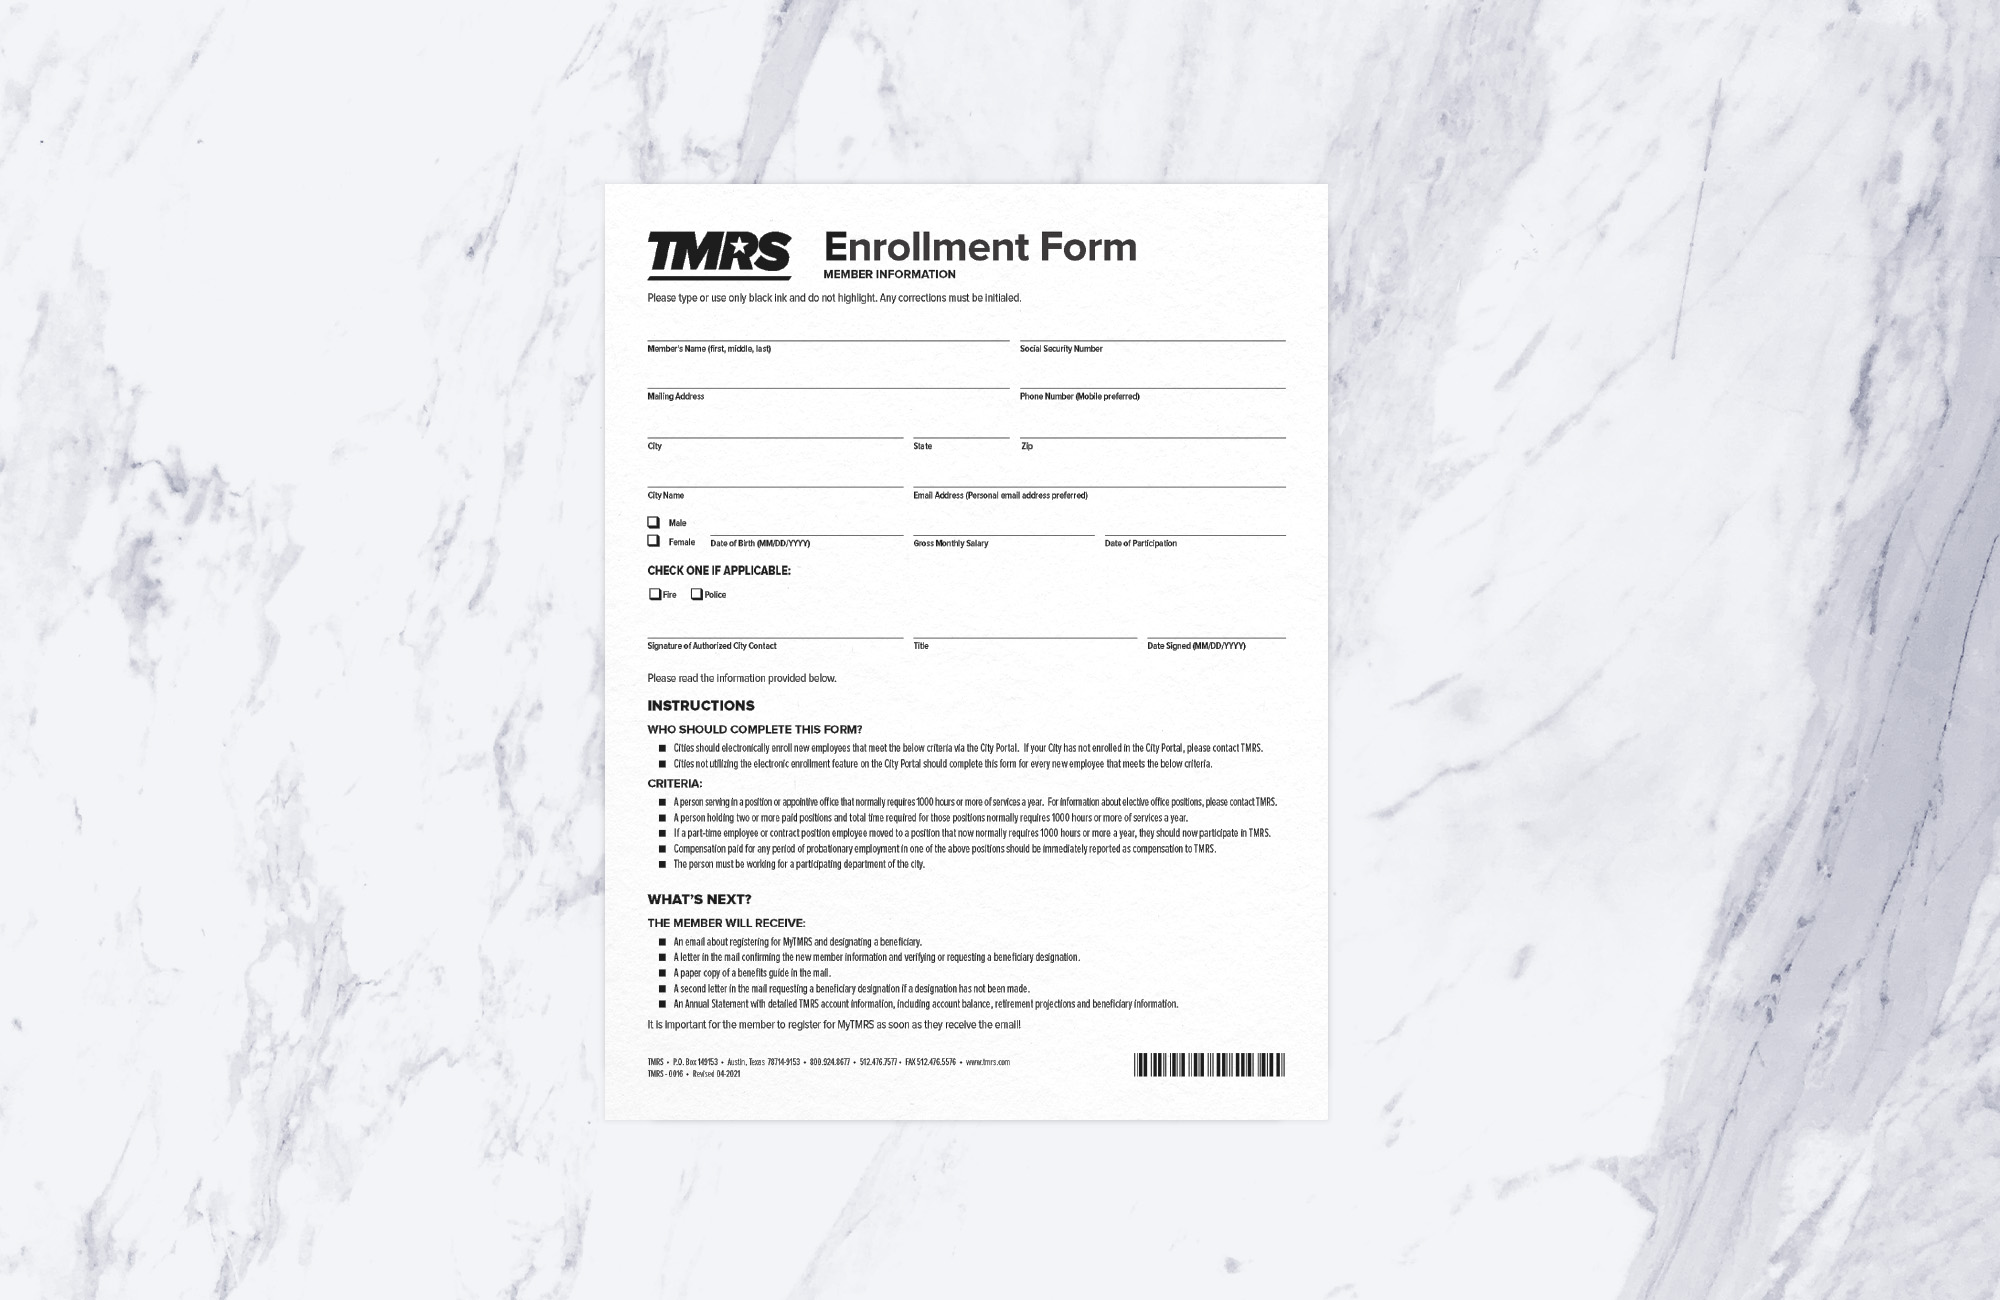 A black and white enrollment form for TMRS Members.